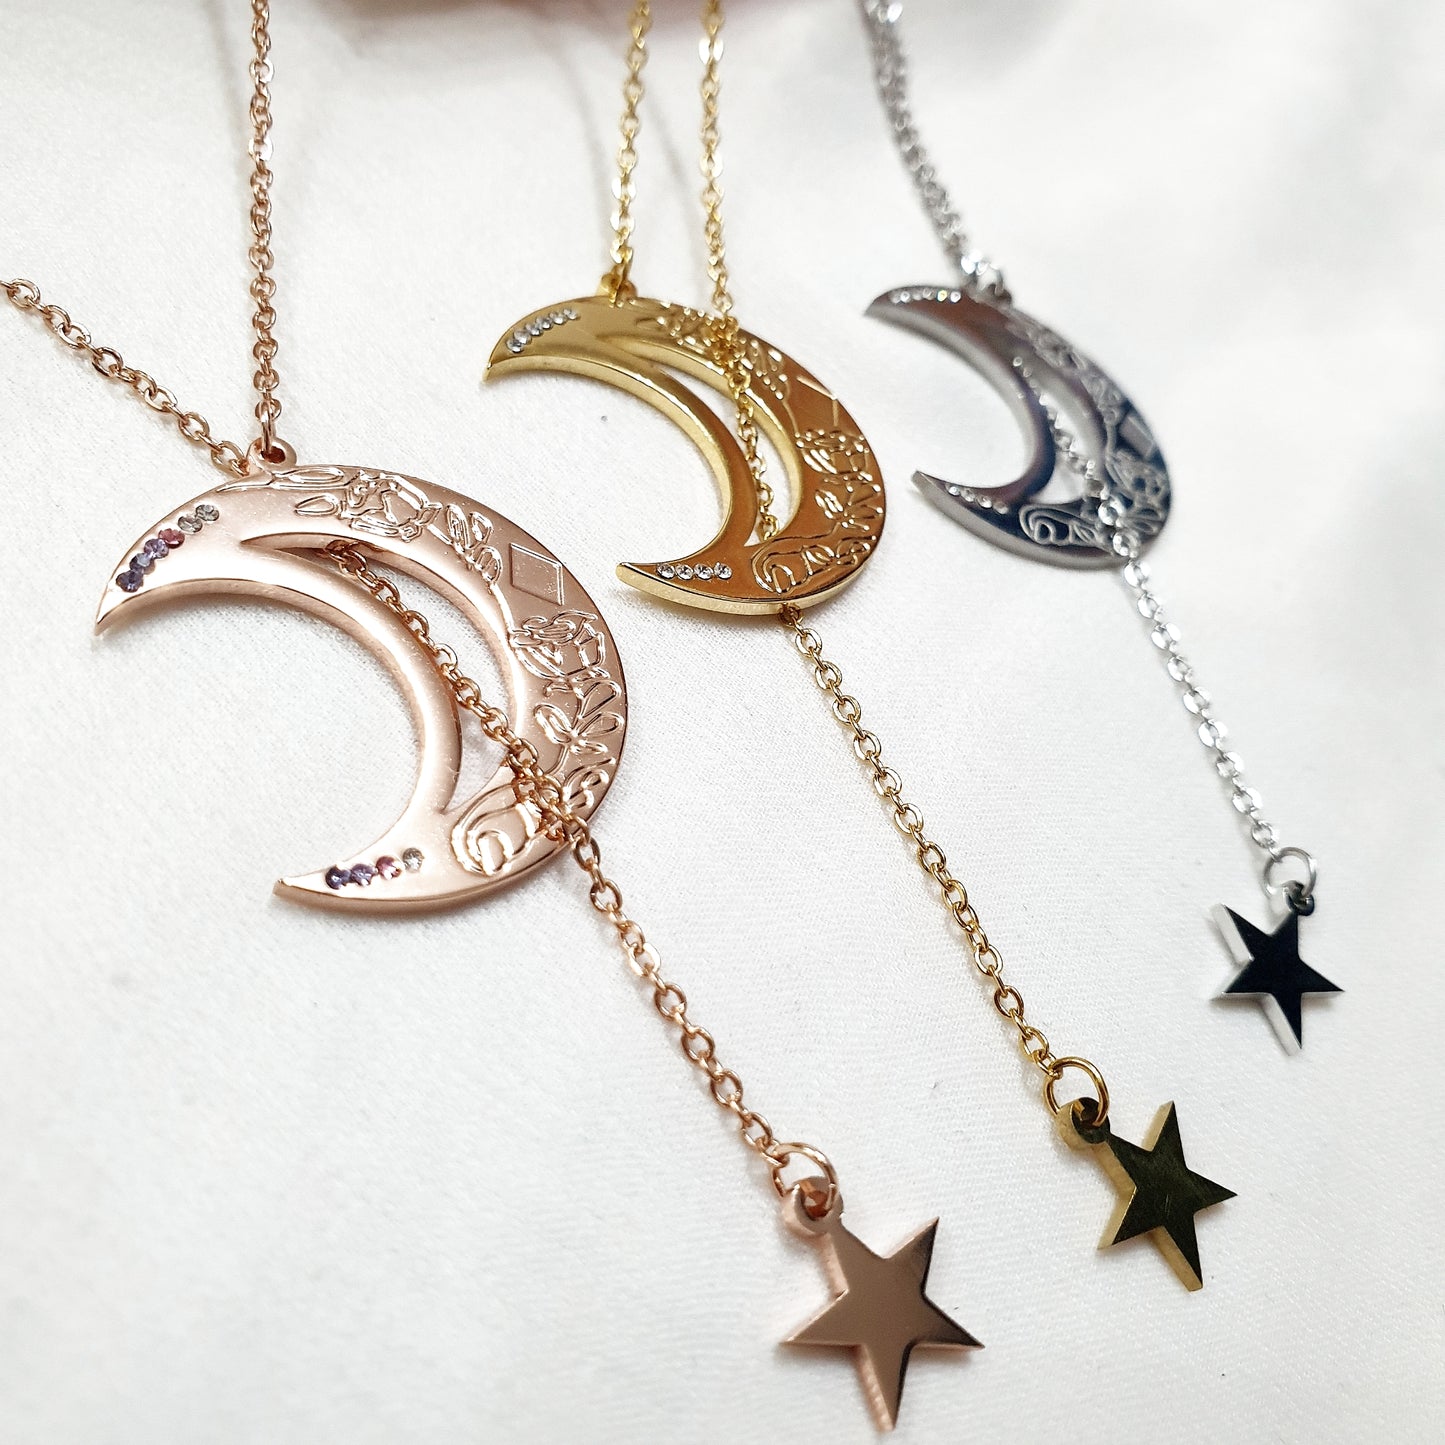 Crescent Moon Kiani Necklace - Exclusive to Tazeen - No Clasp Interlock Chain - Easy to where Able Friendly - Made specially to join in the front